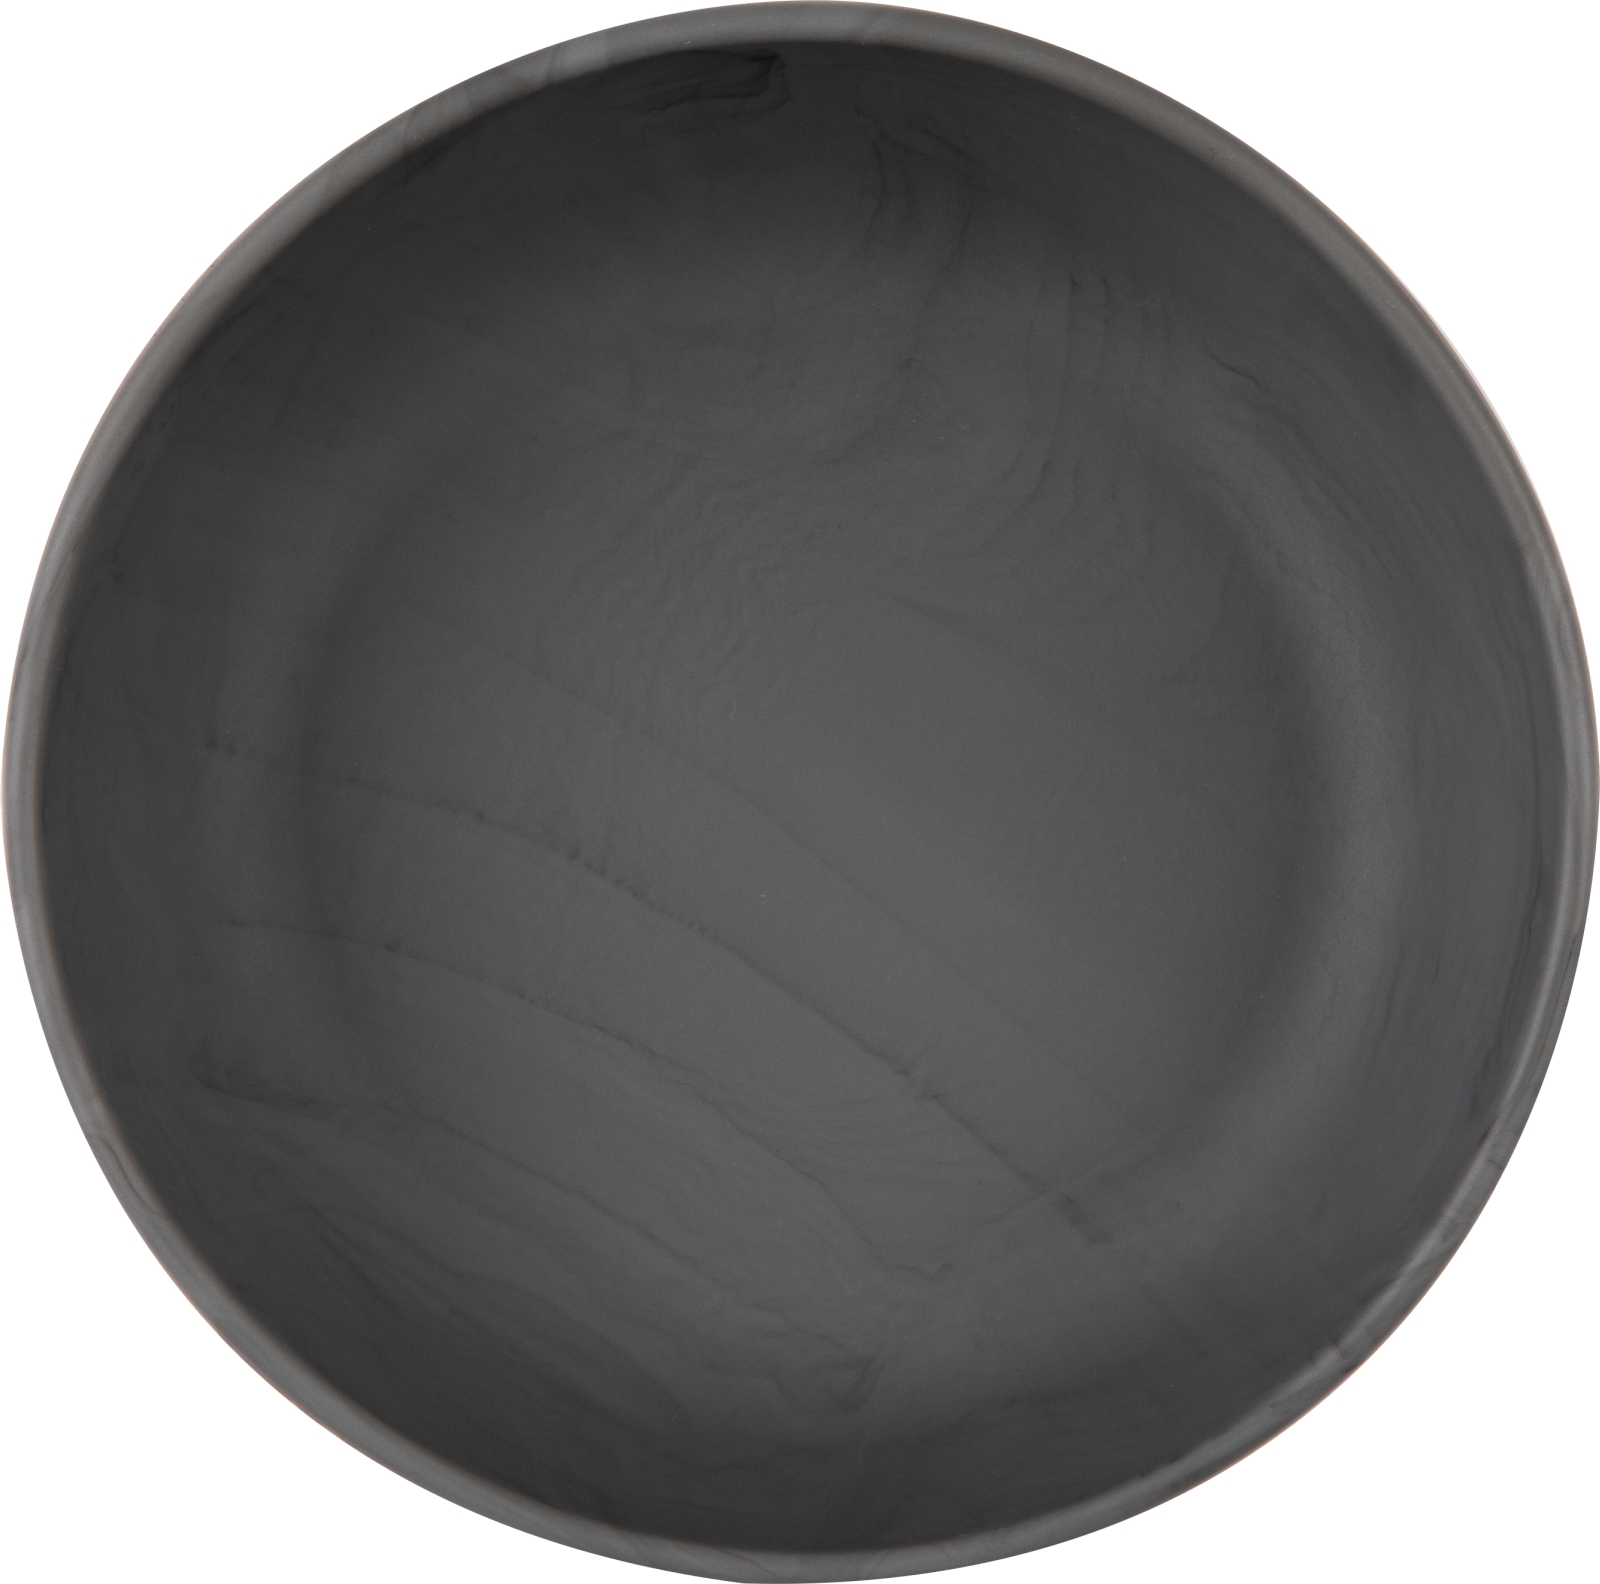 Eeveve Bowl large Silicone Marble Granite Gray